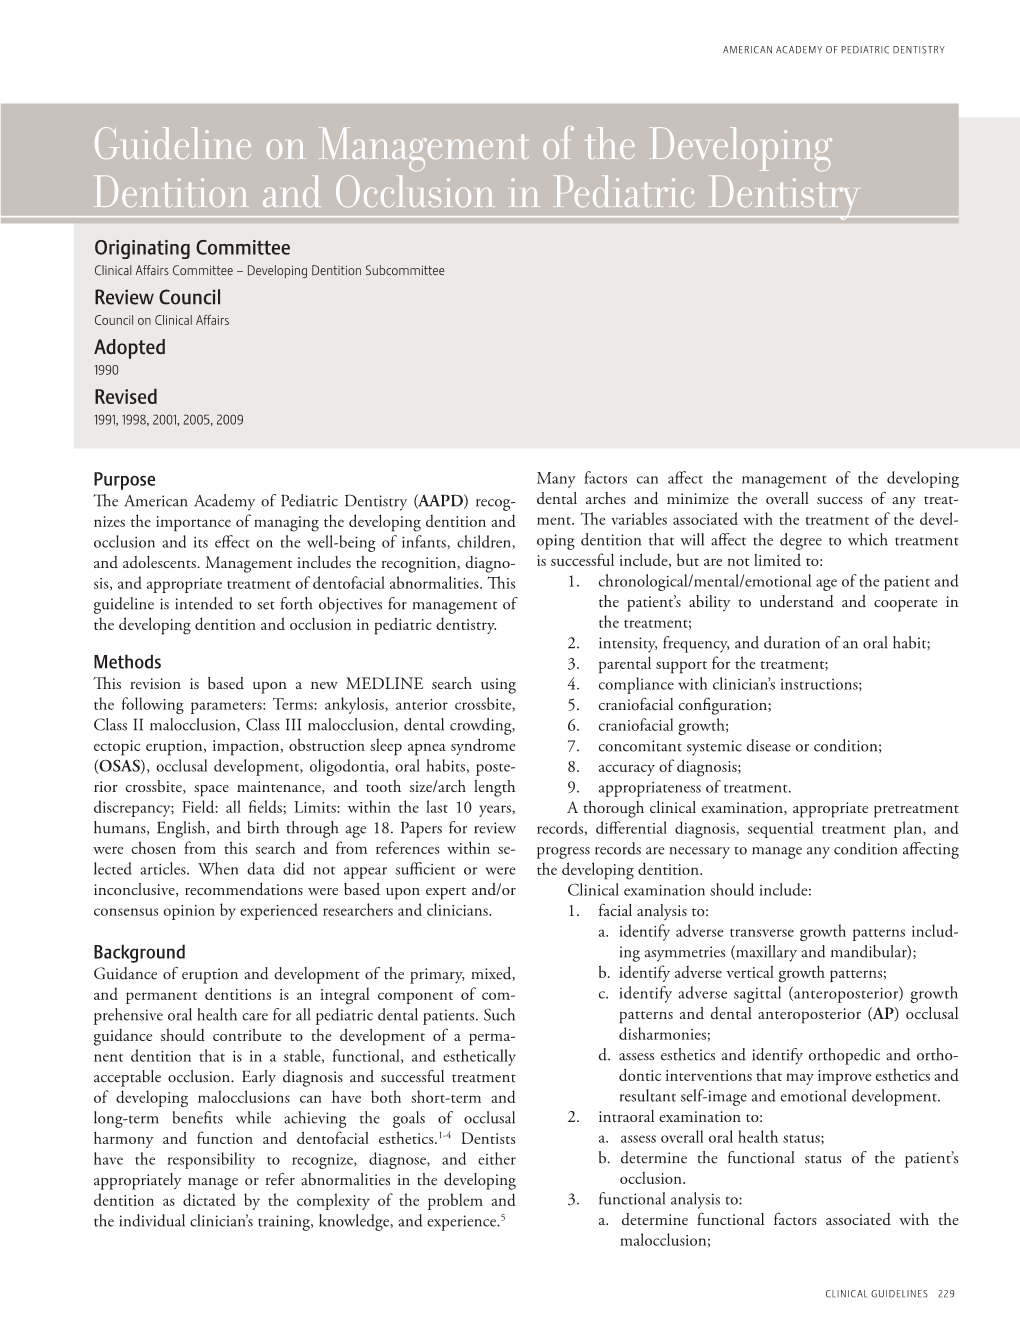 Guideline on Management of the Developing Dentition And